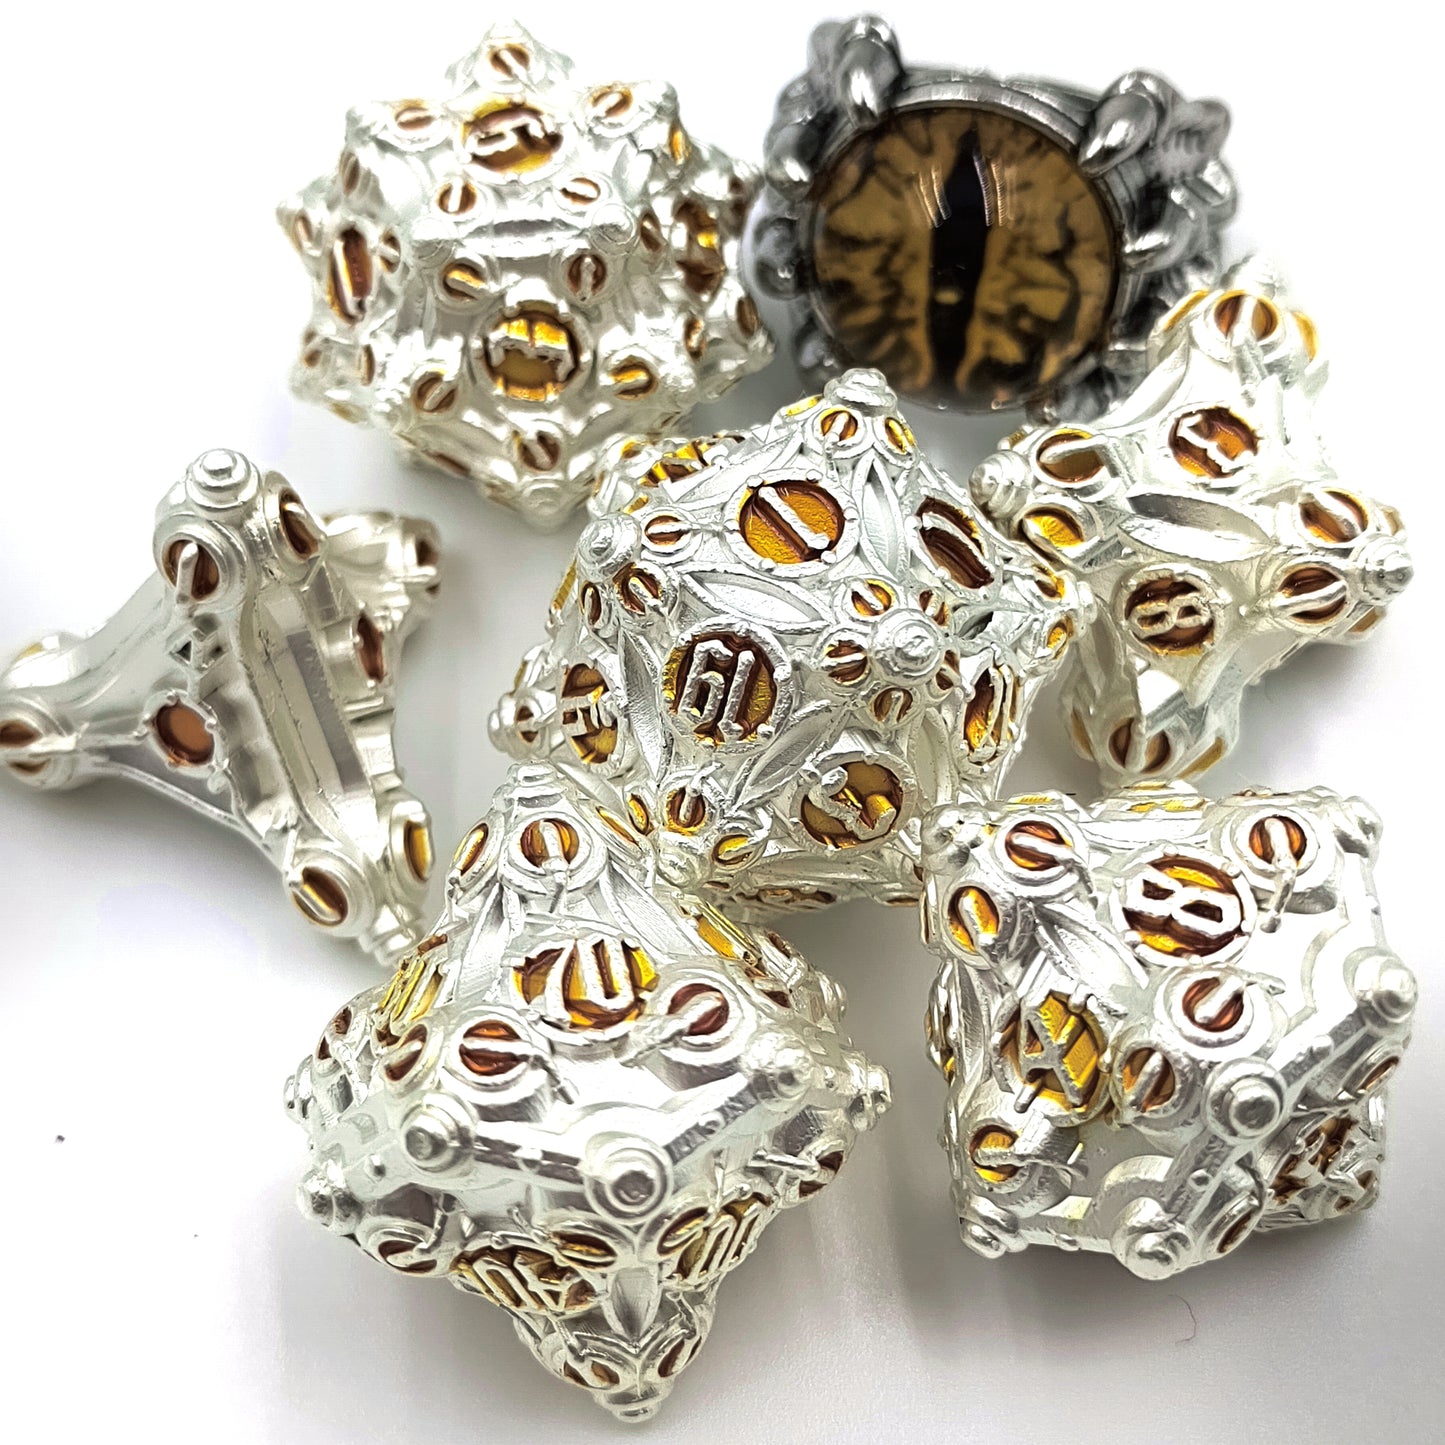 FREE Today: Initiate Attack Metal Dice Set (Give away a random dice set)